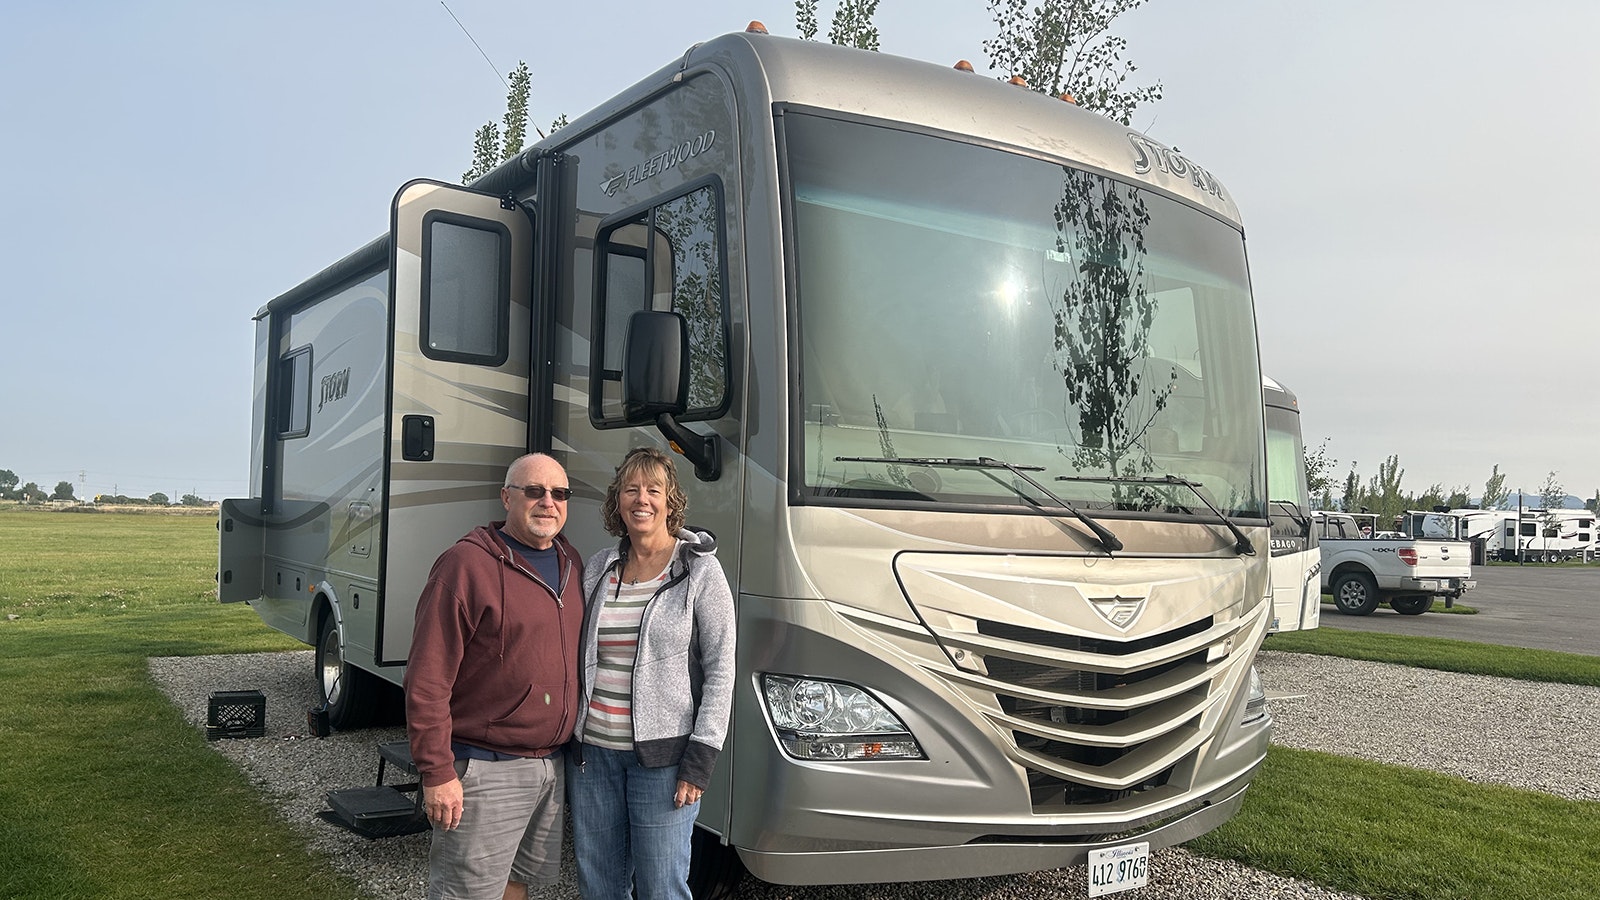 Doug and Trish Biggs of Carbondale, Illinois, are traveling through Wyoming this summer in their Fleetwood Storm motor home. By luxury RV standards, the Briggs are roughing it in their 31-foot 2017 model.